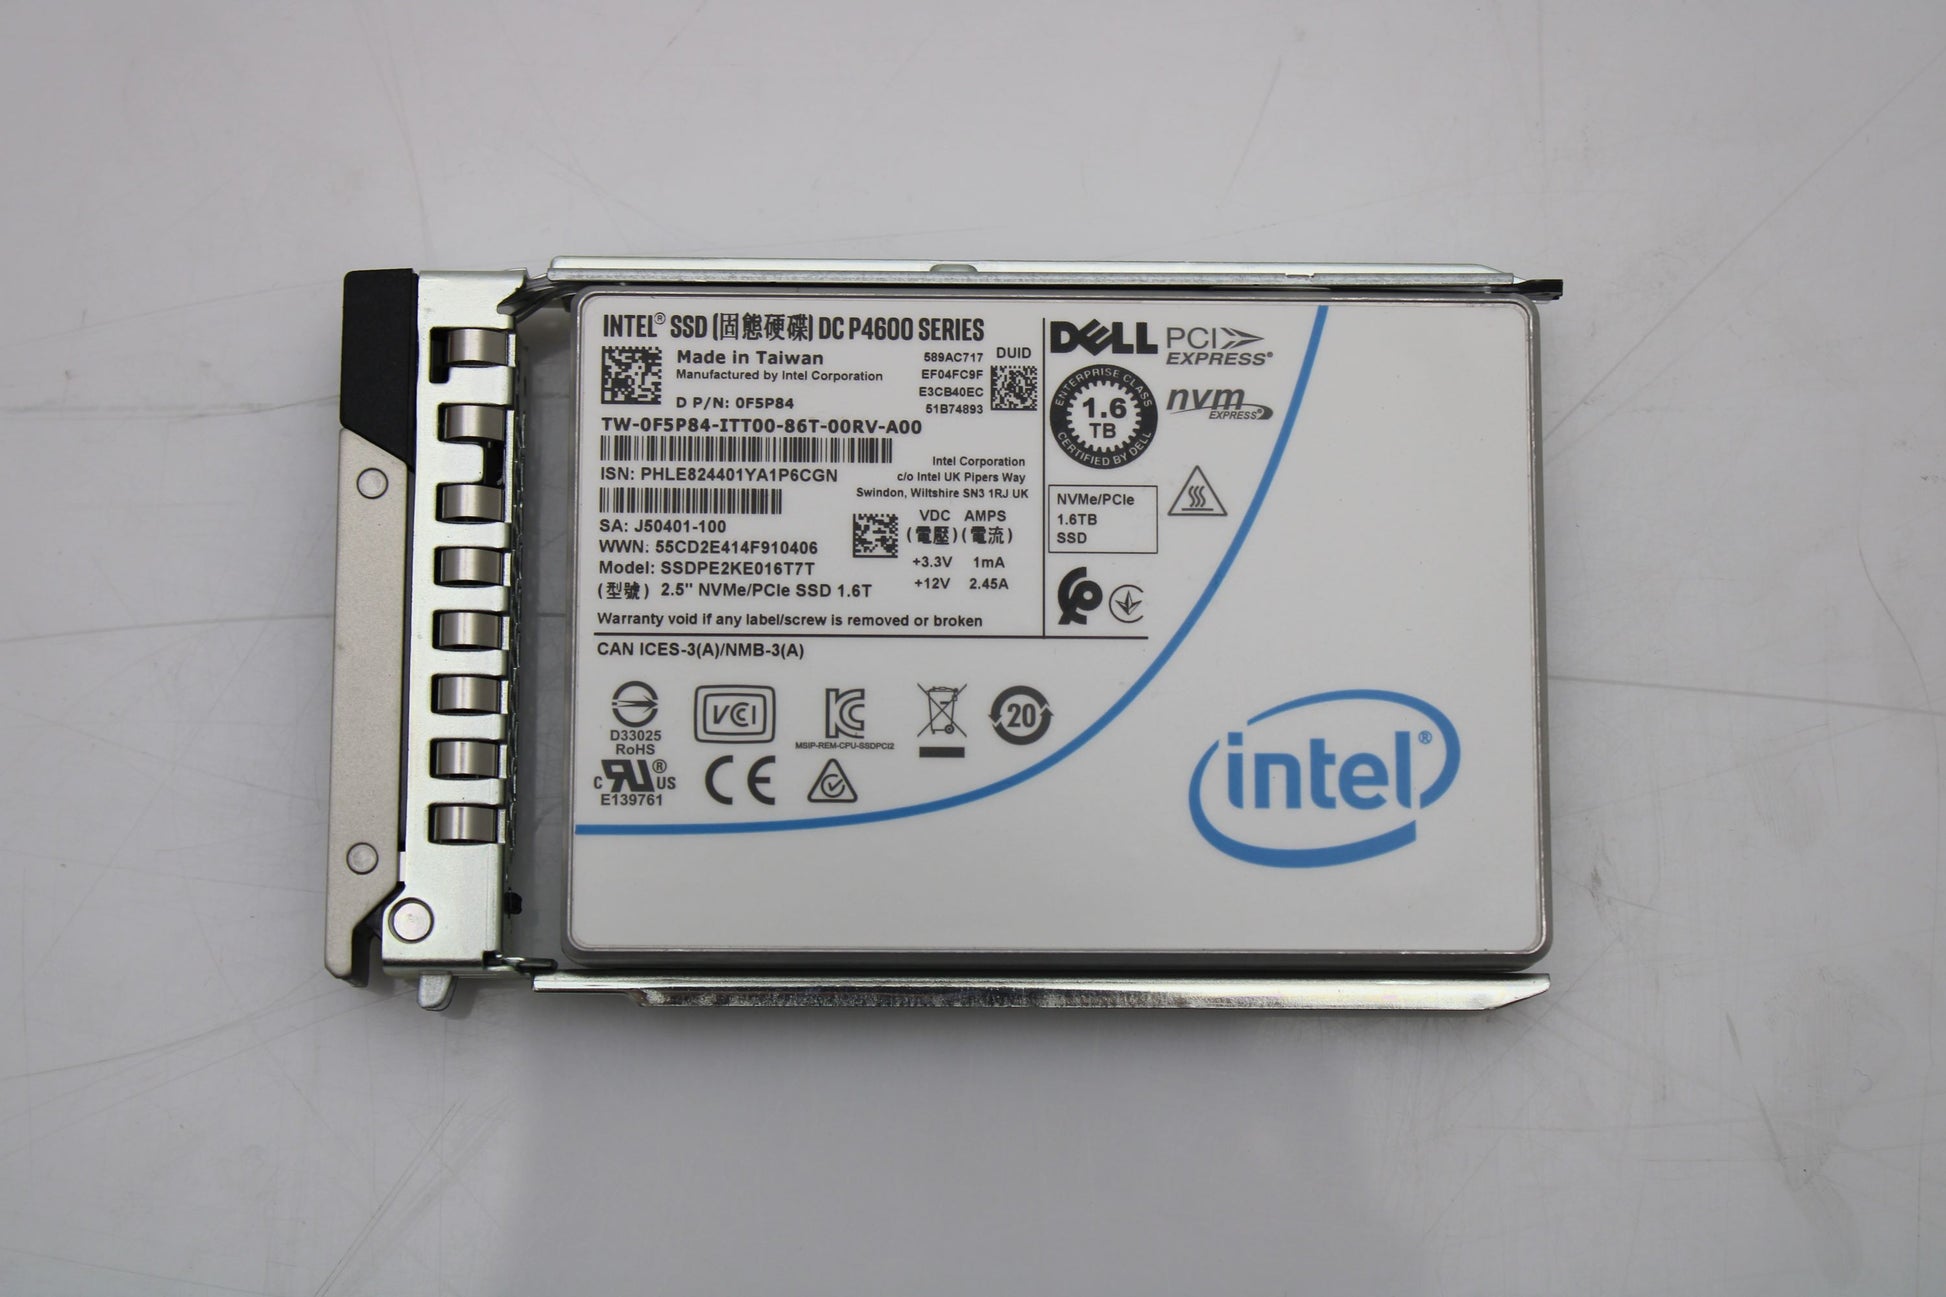 Intel SSDPE2KE016T7T INTEL DC P4600 SSDPE2KE016T7T 1.6TB SSD 2.5 NVME Dell F5P84 Solid State Drive, Used